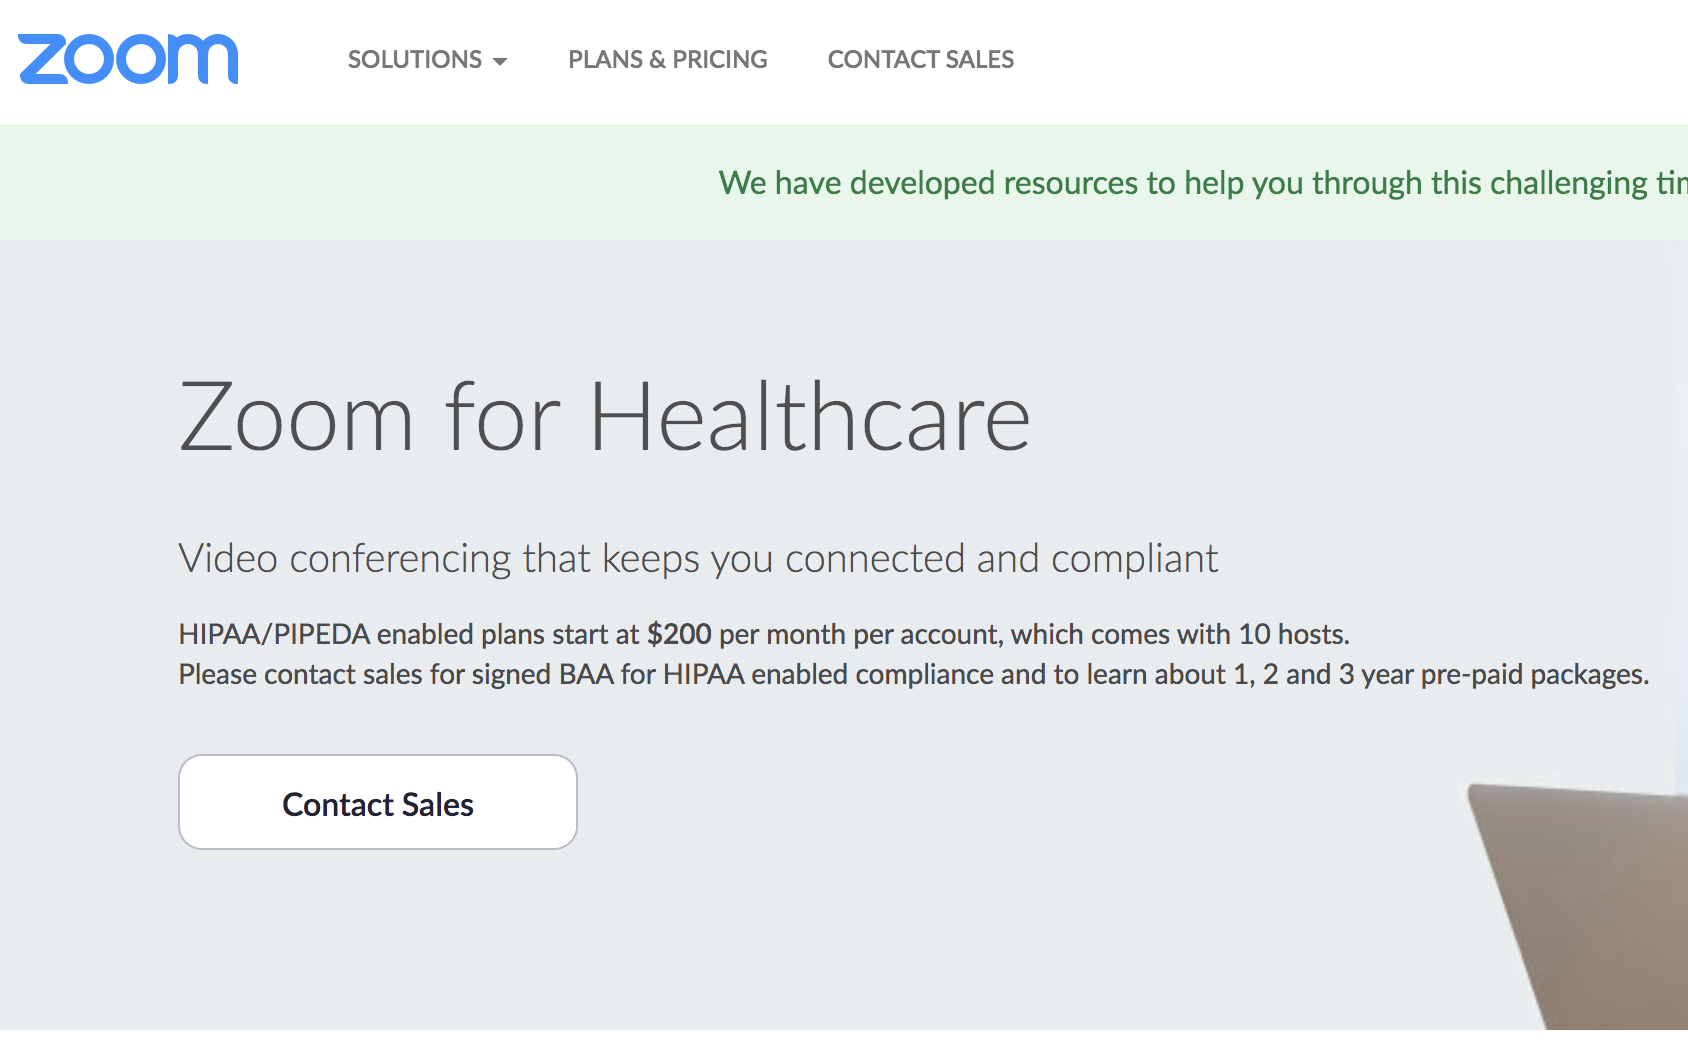 Zoom for Healthcare Pricing